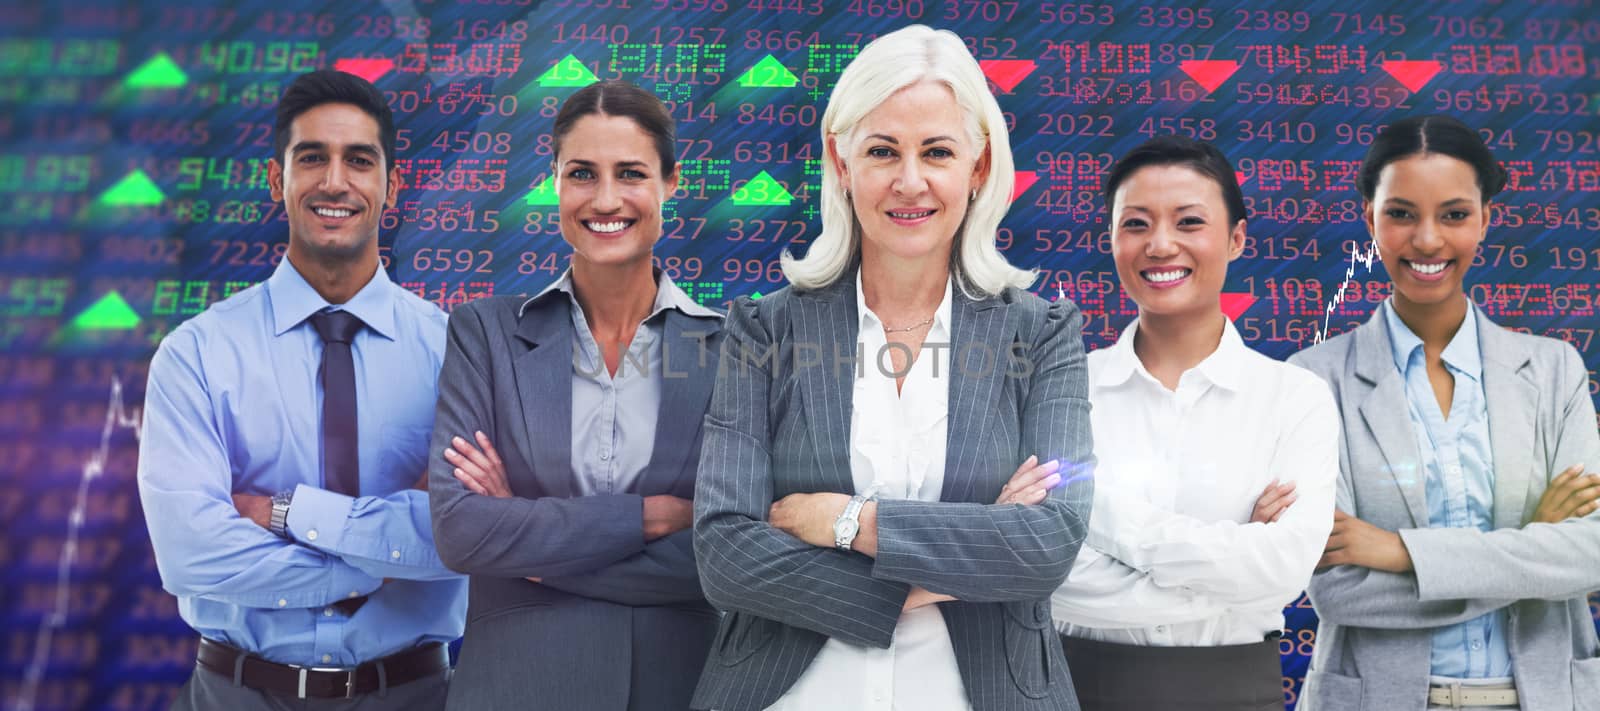 Business people with arms crossed smiling at camera  against stocks and shares